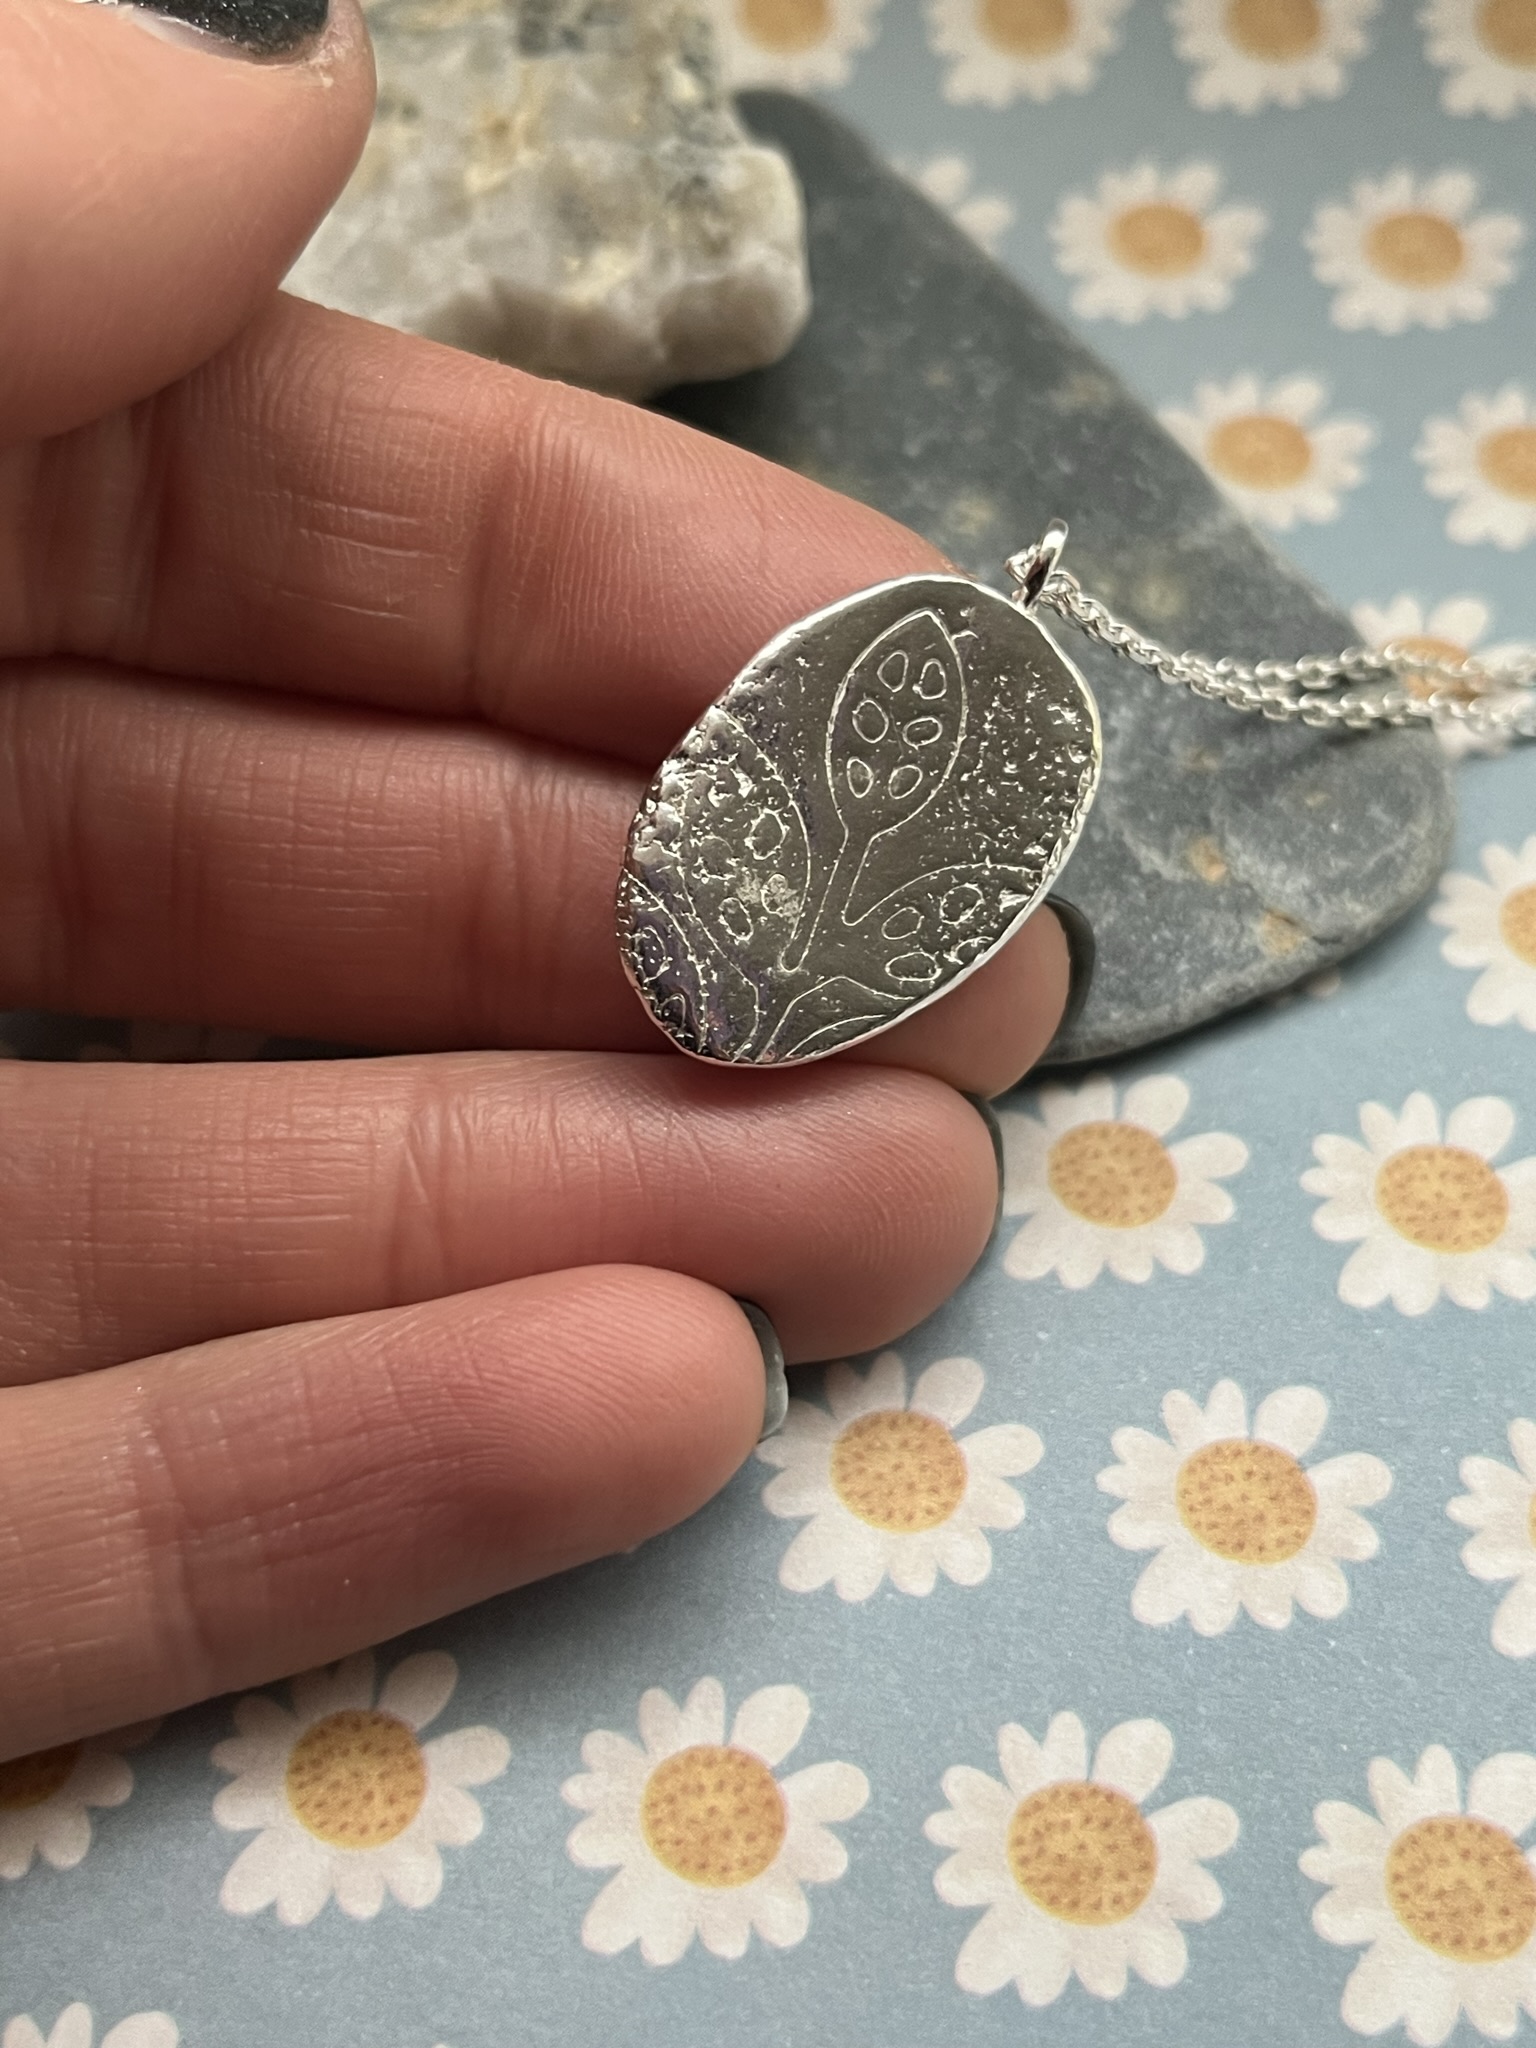 Silver Clay FAQs - The Bench